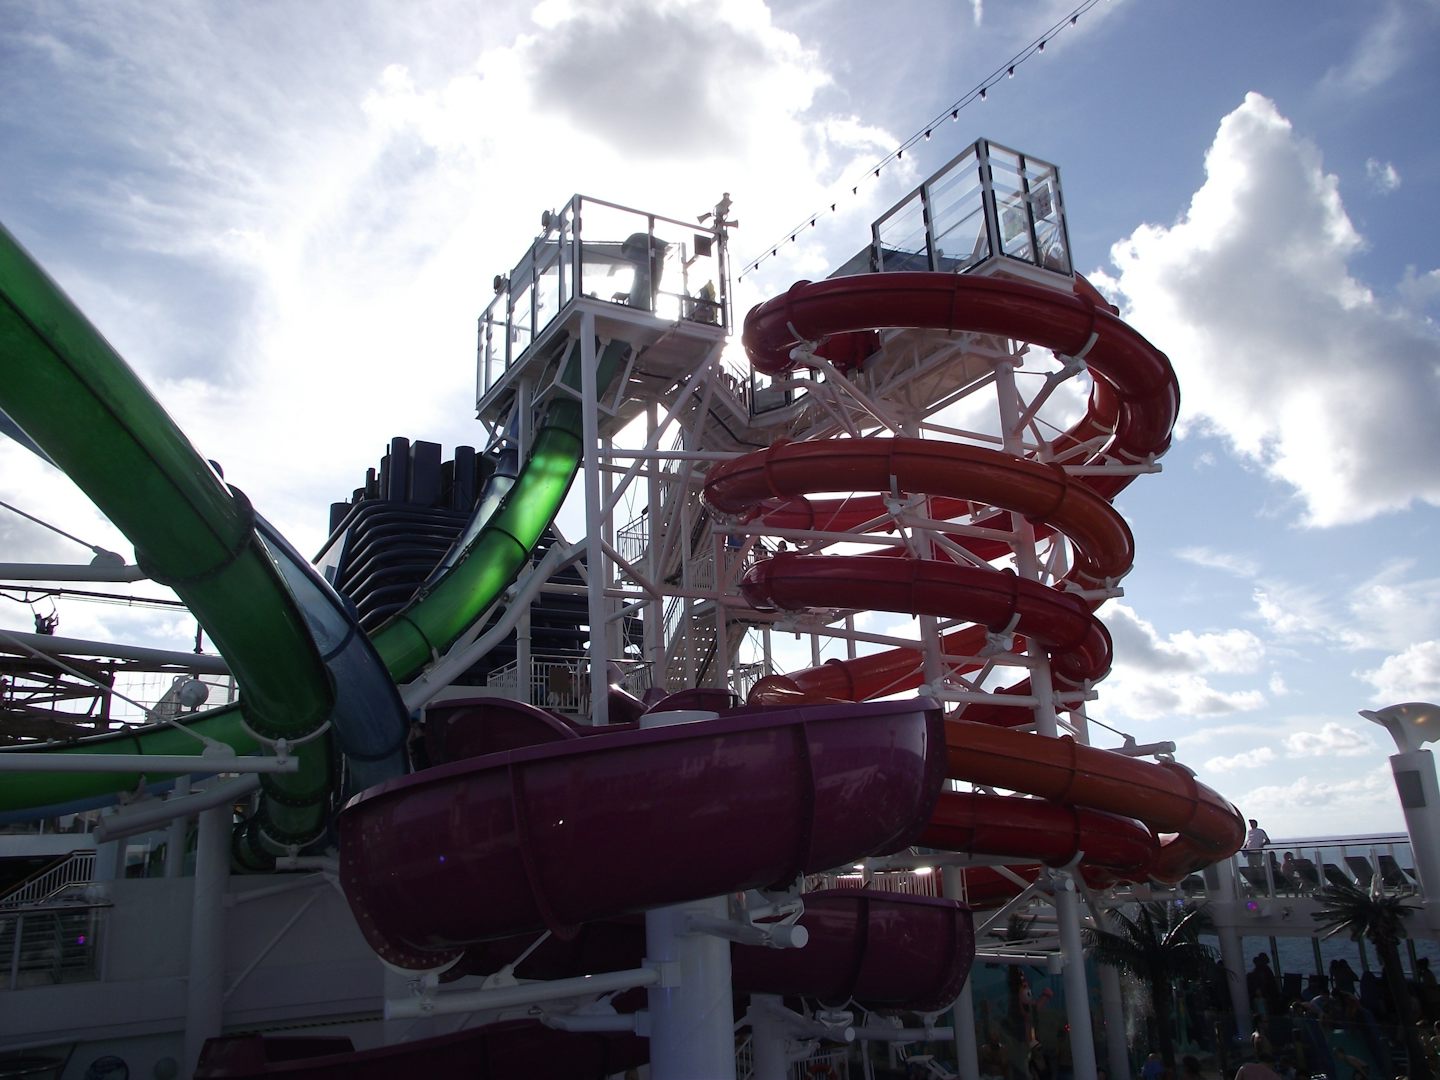 The Waterslides